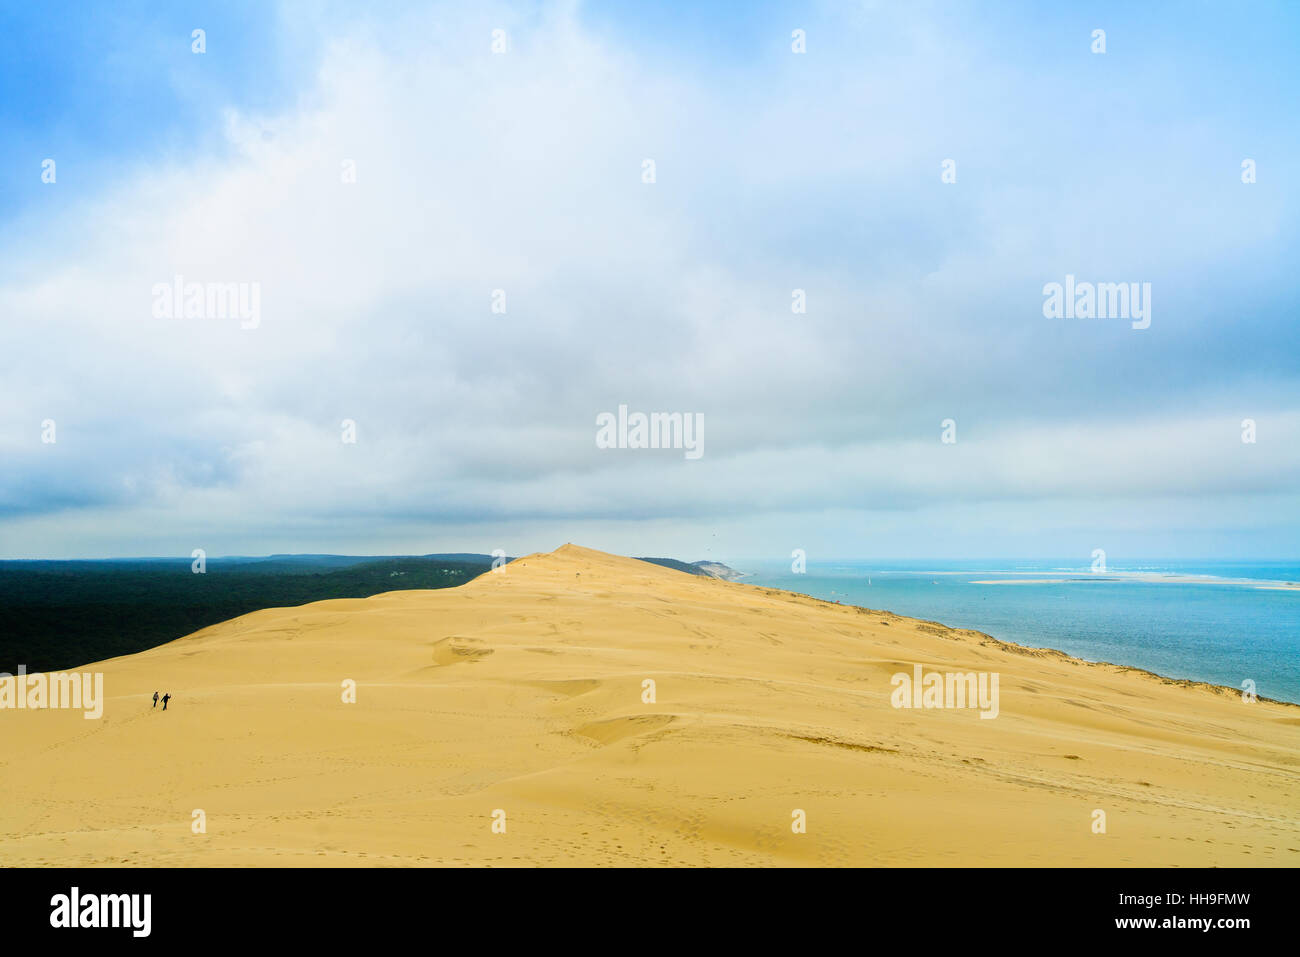 Pyla or pilat dune, Bordeaux. France, largest sand dune in Europe and ocean on background. Stock Photo